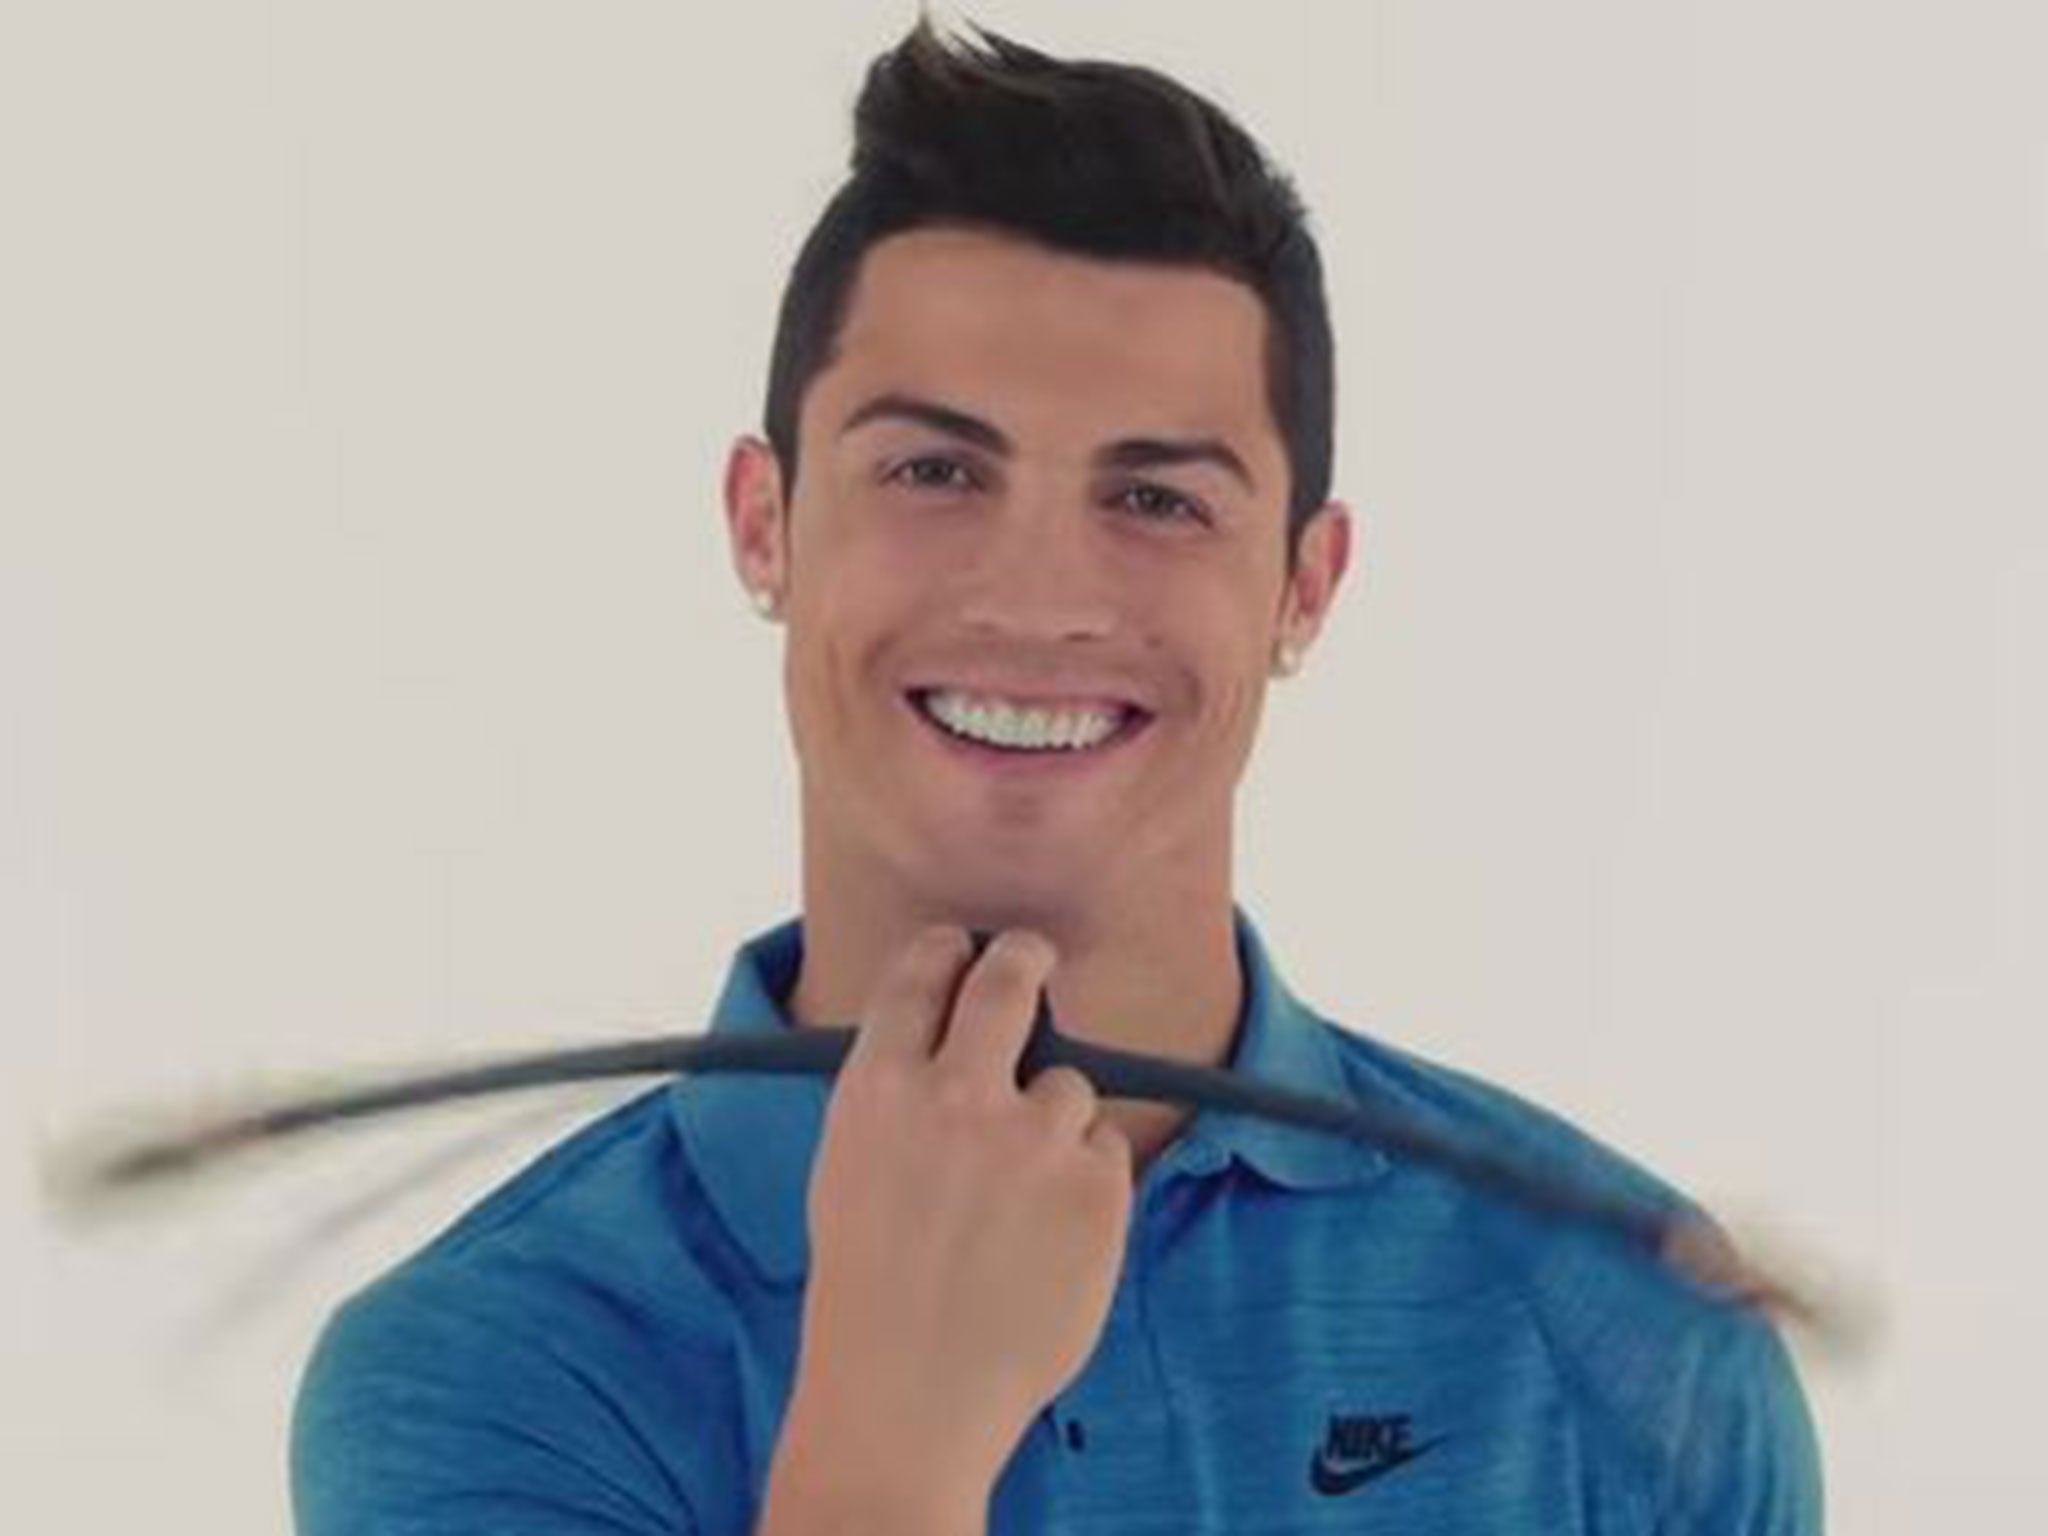 Cristiano Ronaldo has appeared in a bizarre new video for Japanese TV